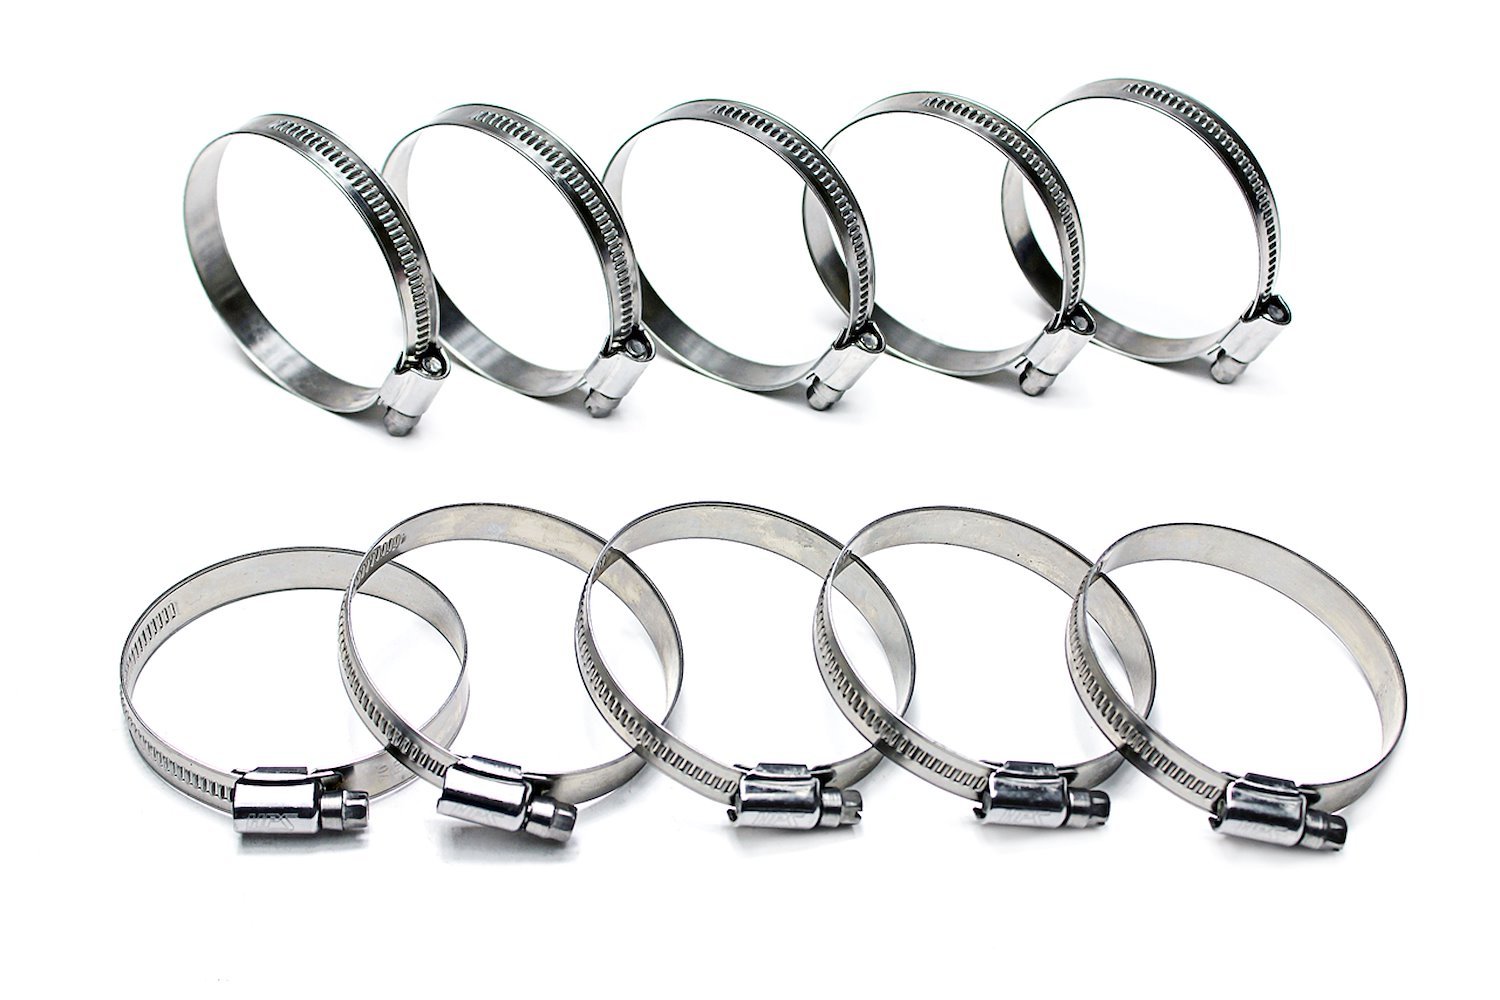 EMSC-25-40x10 Embossed Hose Clamp, Stainless Steel Embossed Hose Clamp, Size #16, Size Range: 1-1/16 in.- 1-1/2 in., 10Pc